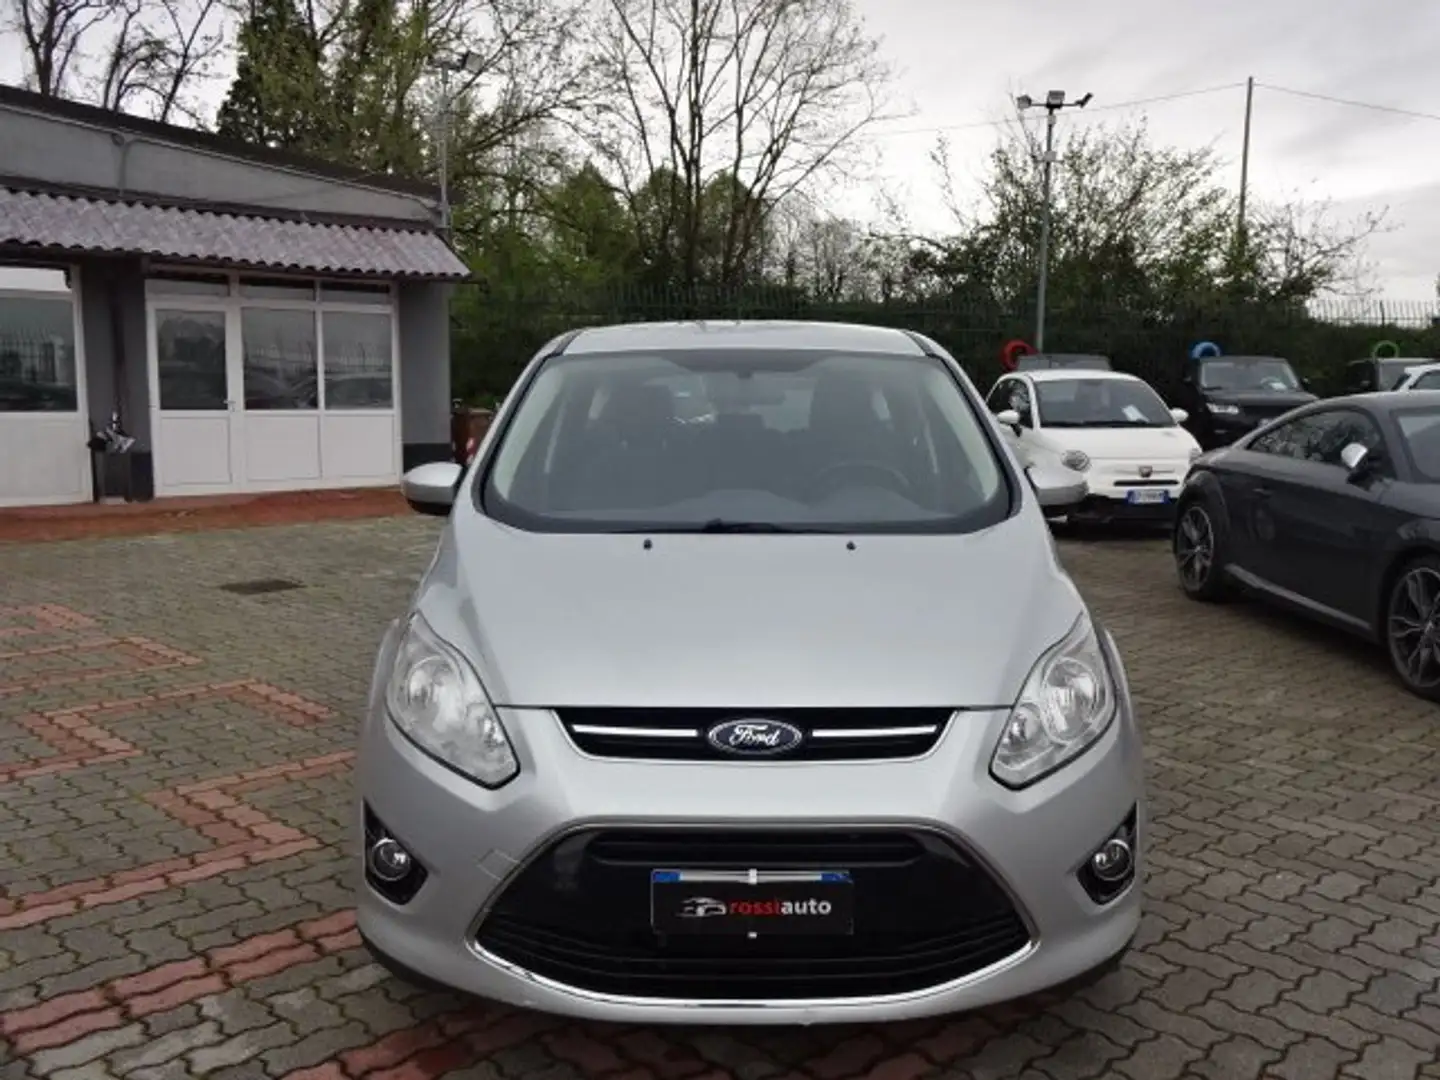 Ford C-Max 1.6 tdci Business SYNC 115cv Argent - 2